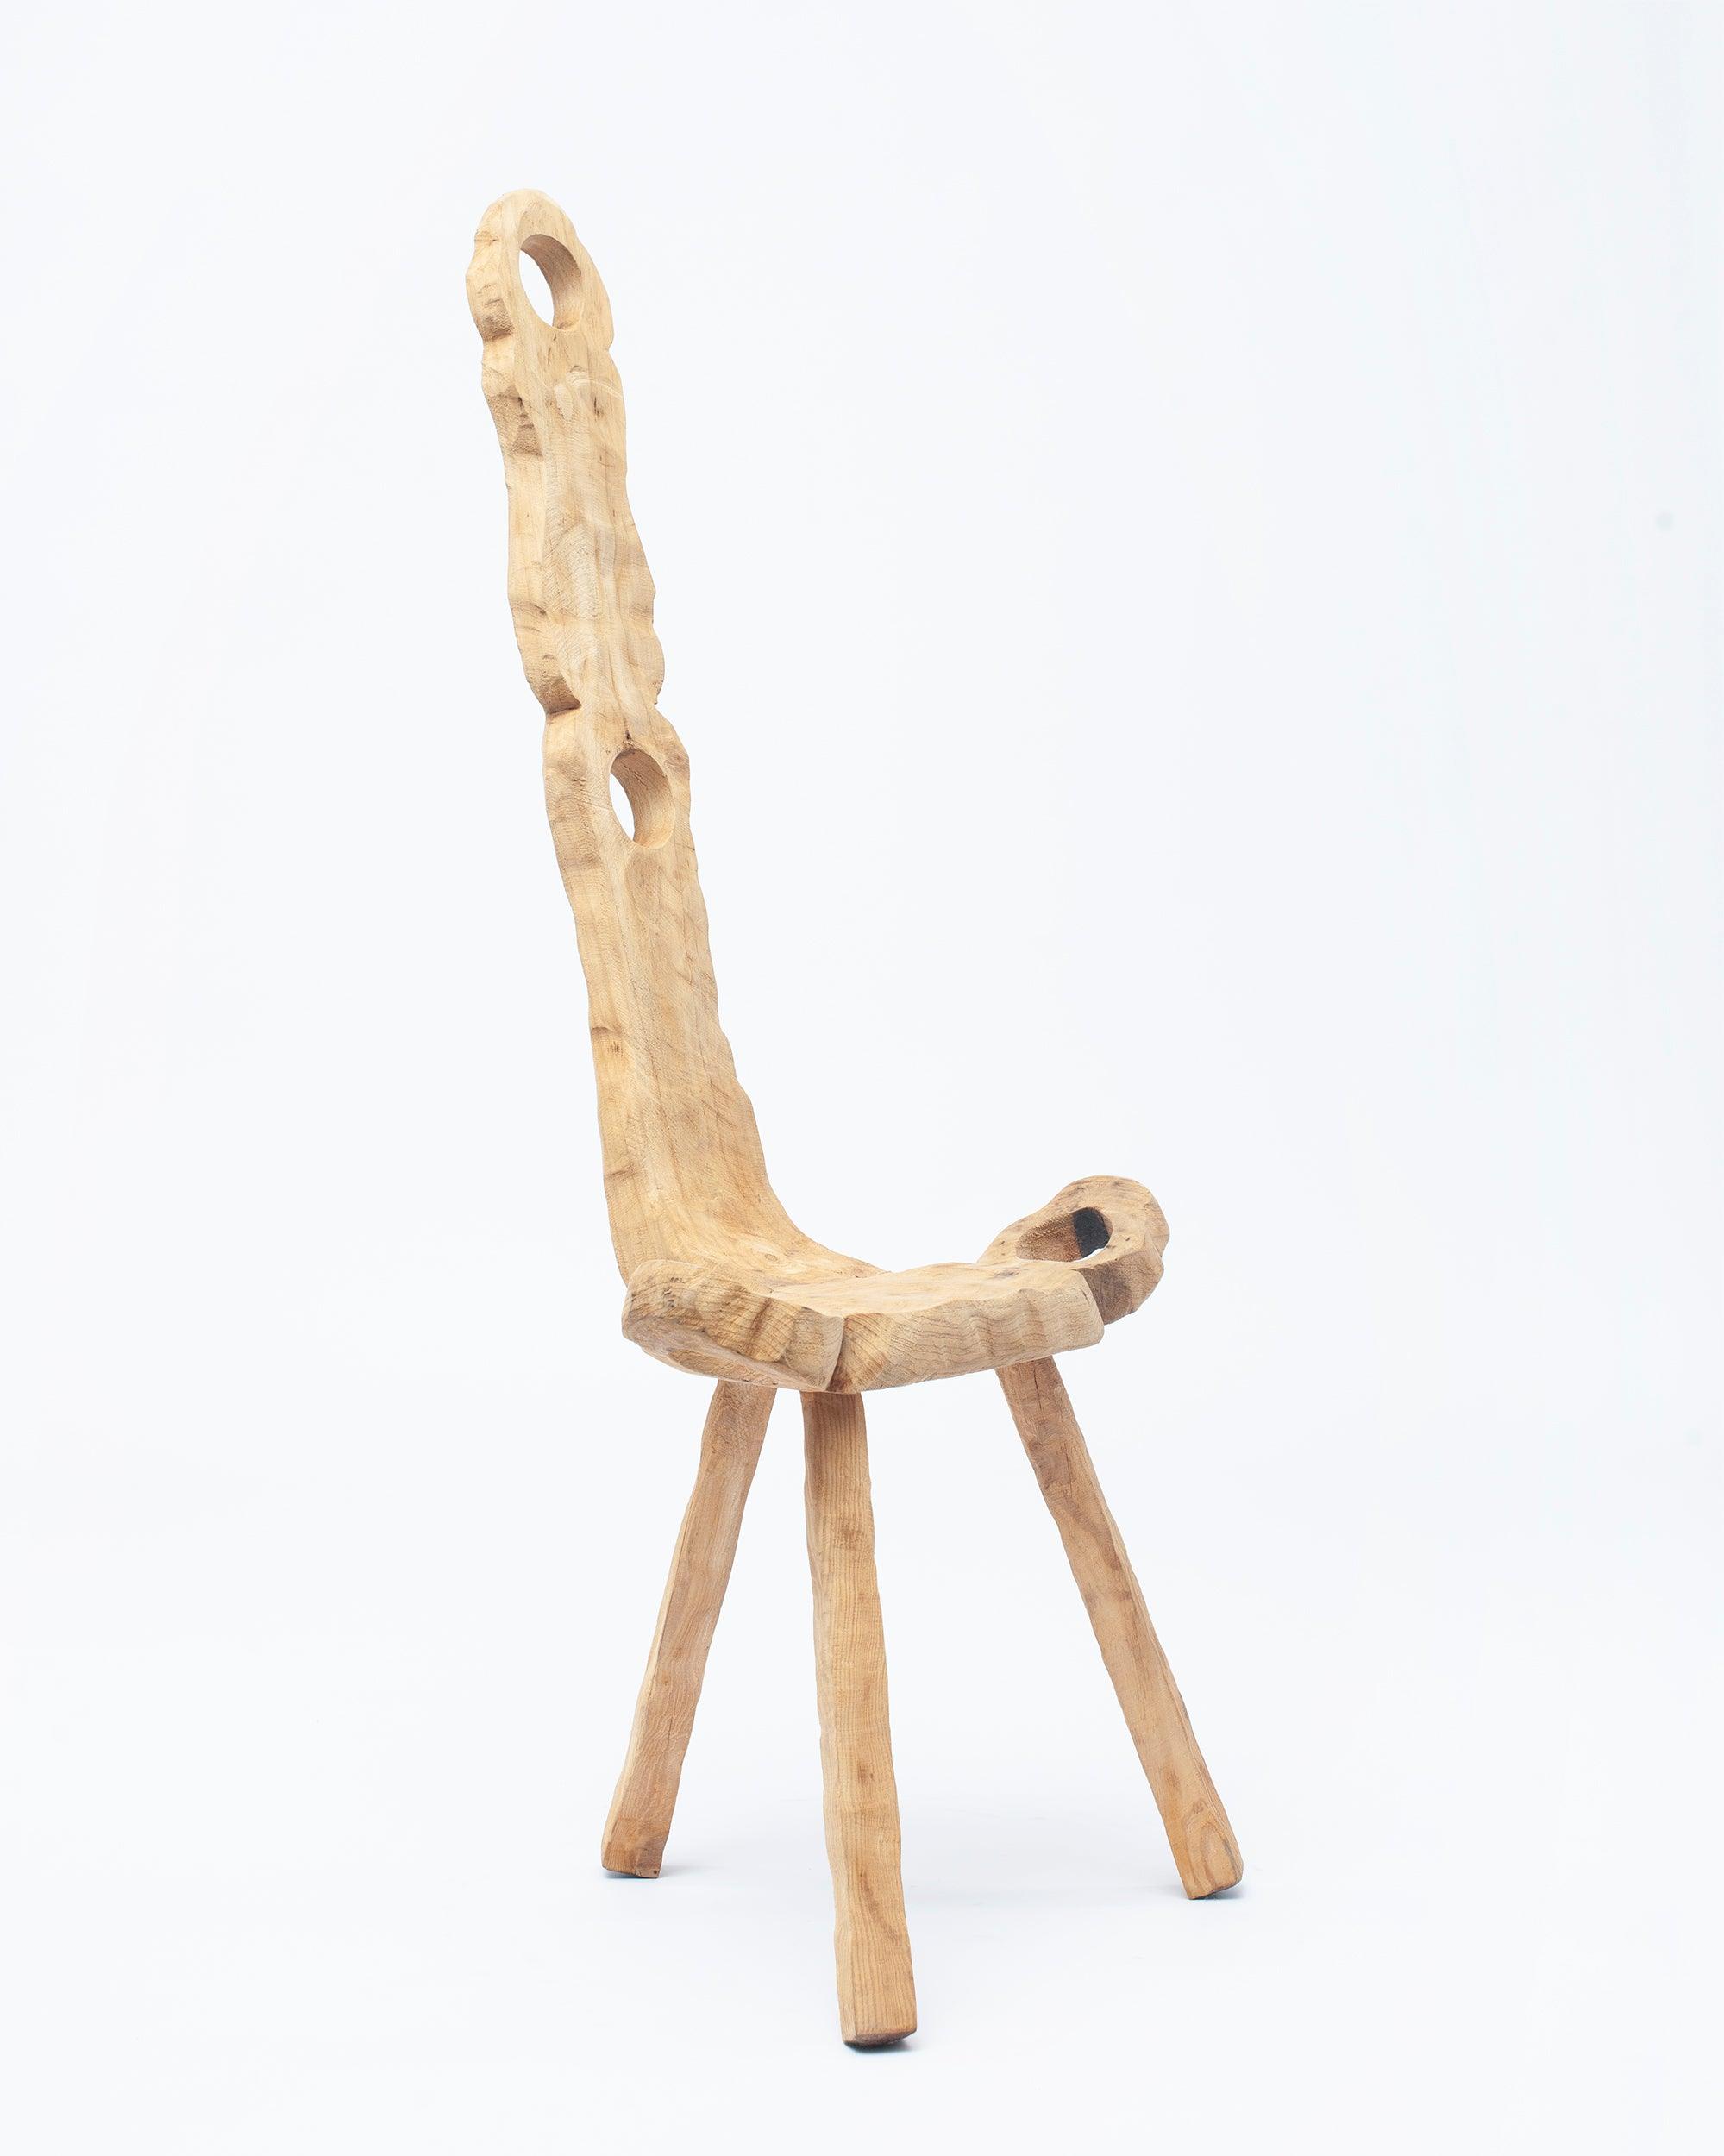 Hand-carved wooden collectible chair by NIKO JUNE studio image in white background